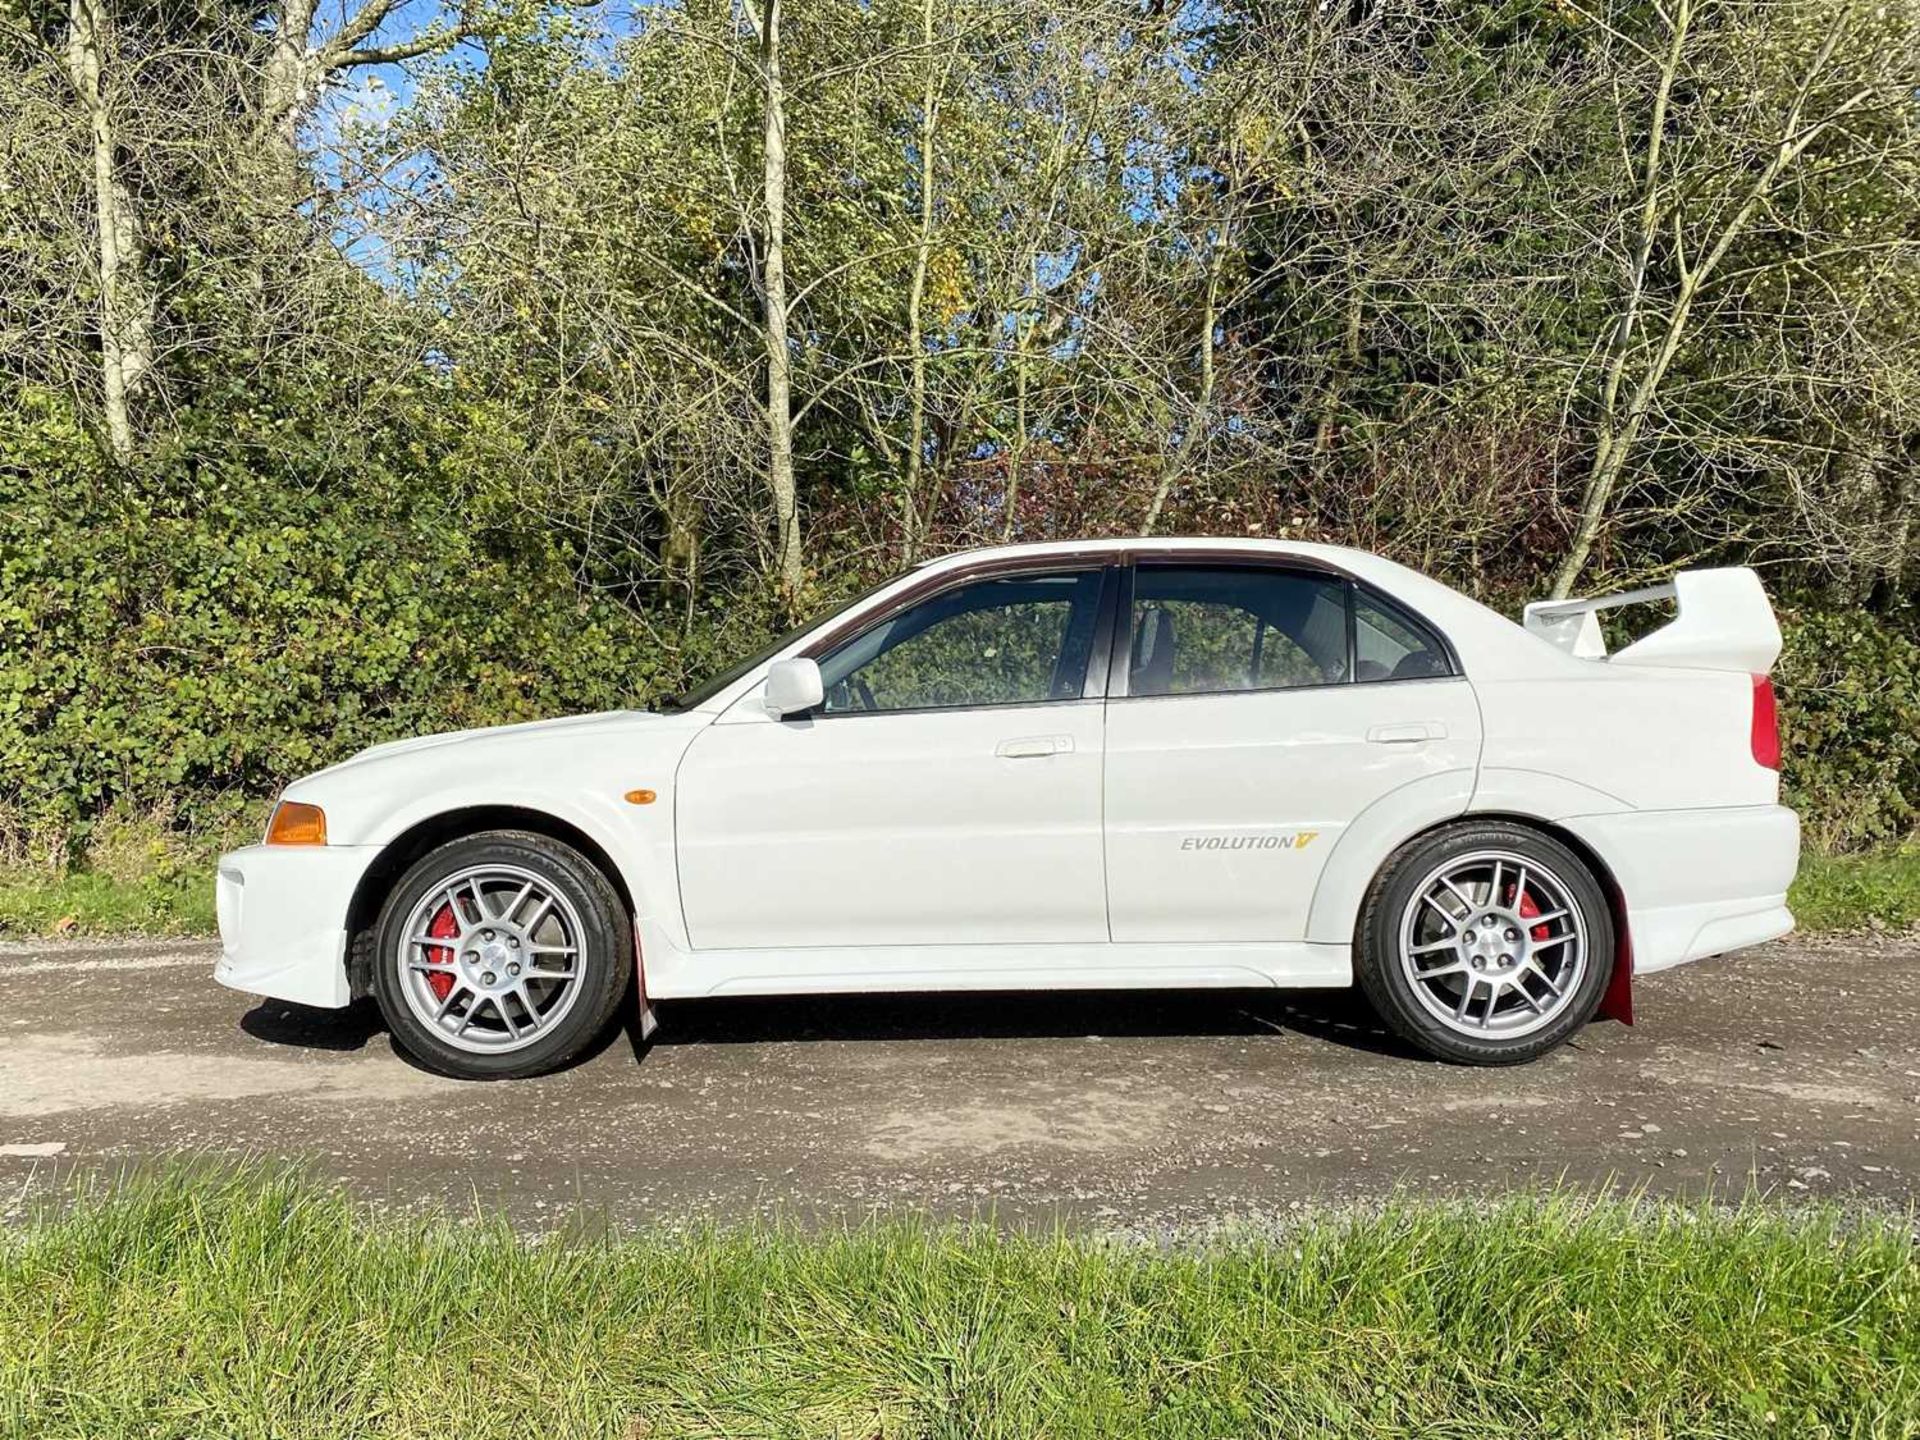 1998 Mitsubishi Lancer Evolution V GSR One UK keeper since being imported two years ago - Image 10 of 100